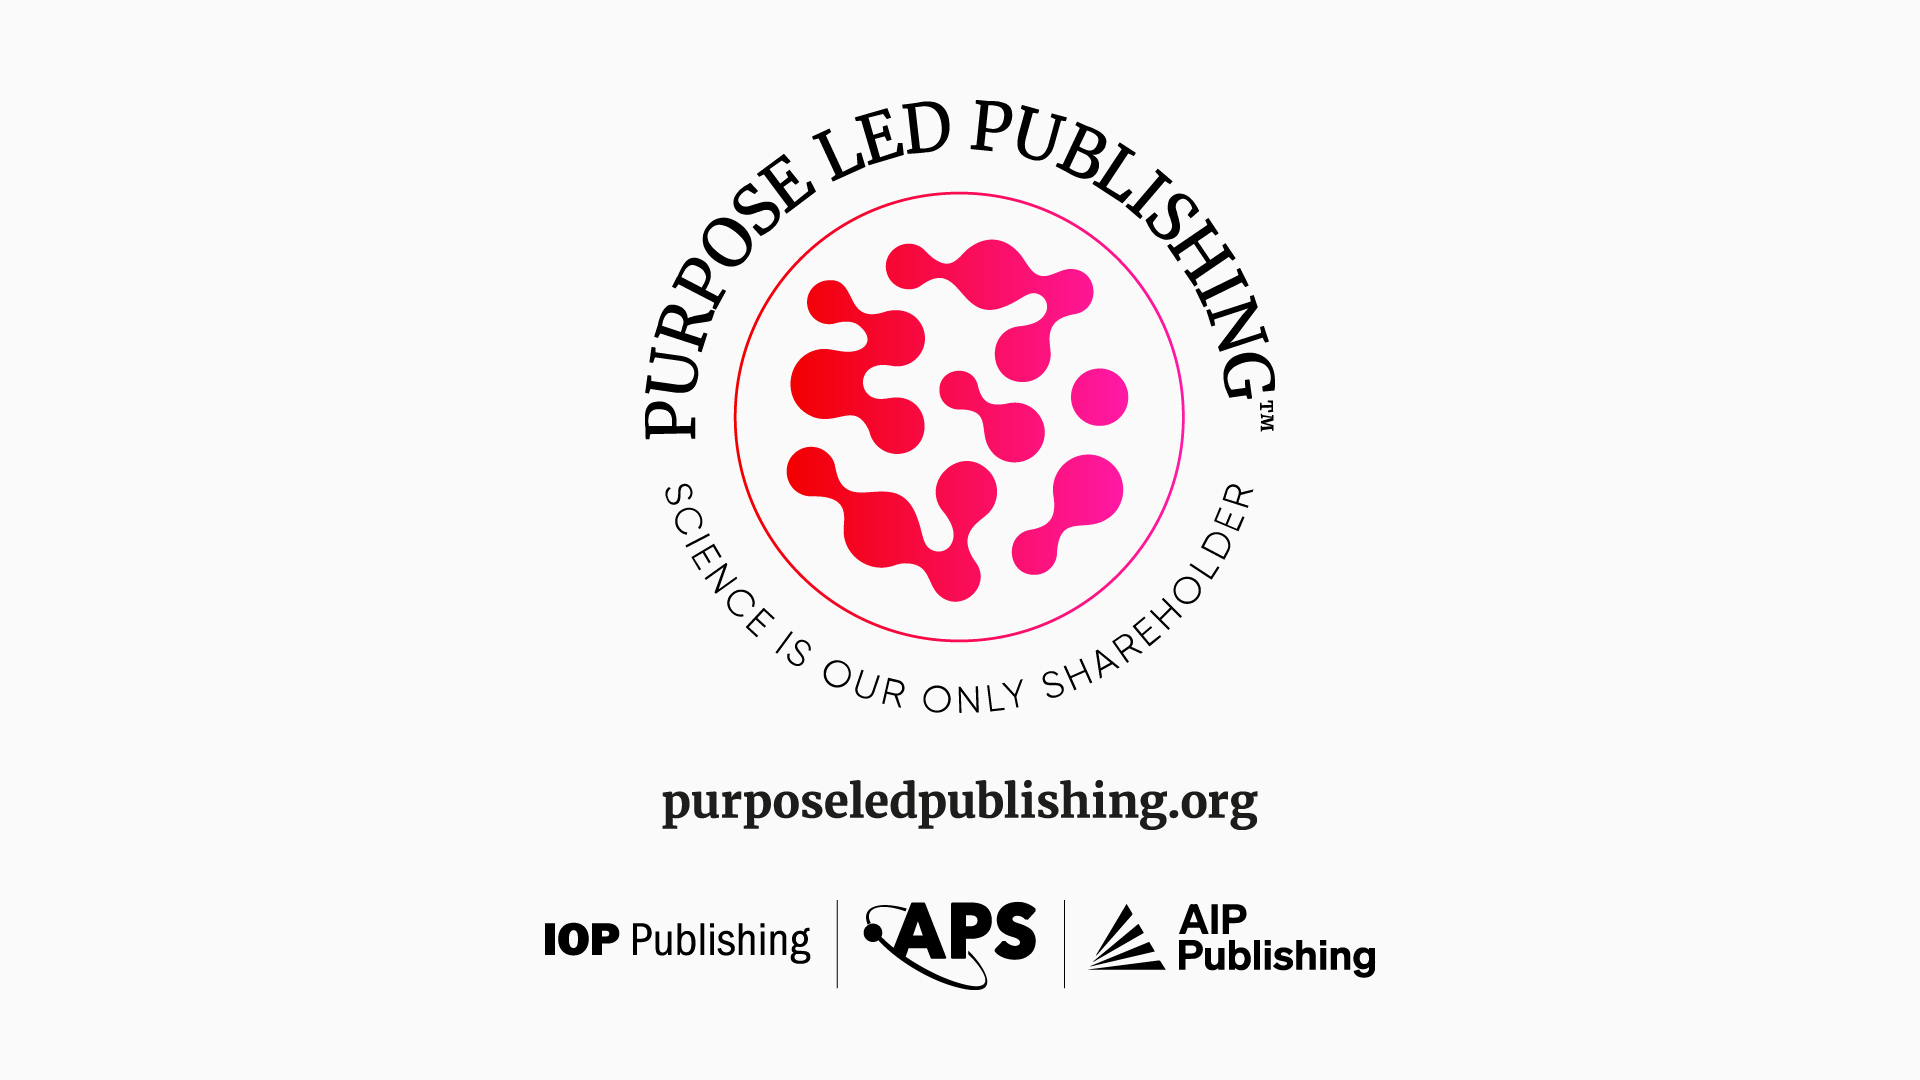 AIP Publishing, the American Physical Society, and IOP Publishing have joined forces to create Purpose-Led Publishing (PLP), a new coalition with a promise to always put purpose above profit. 